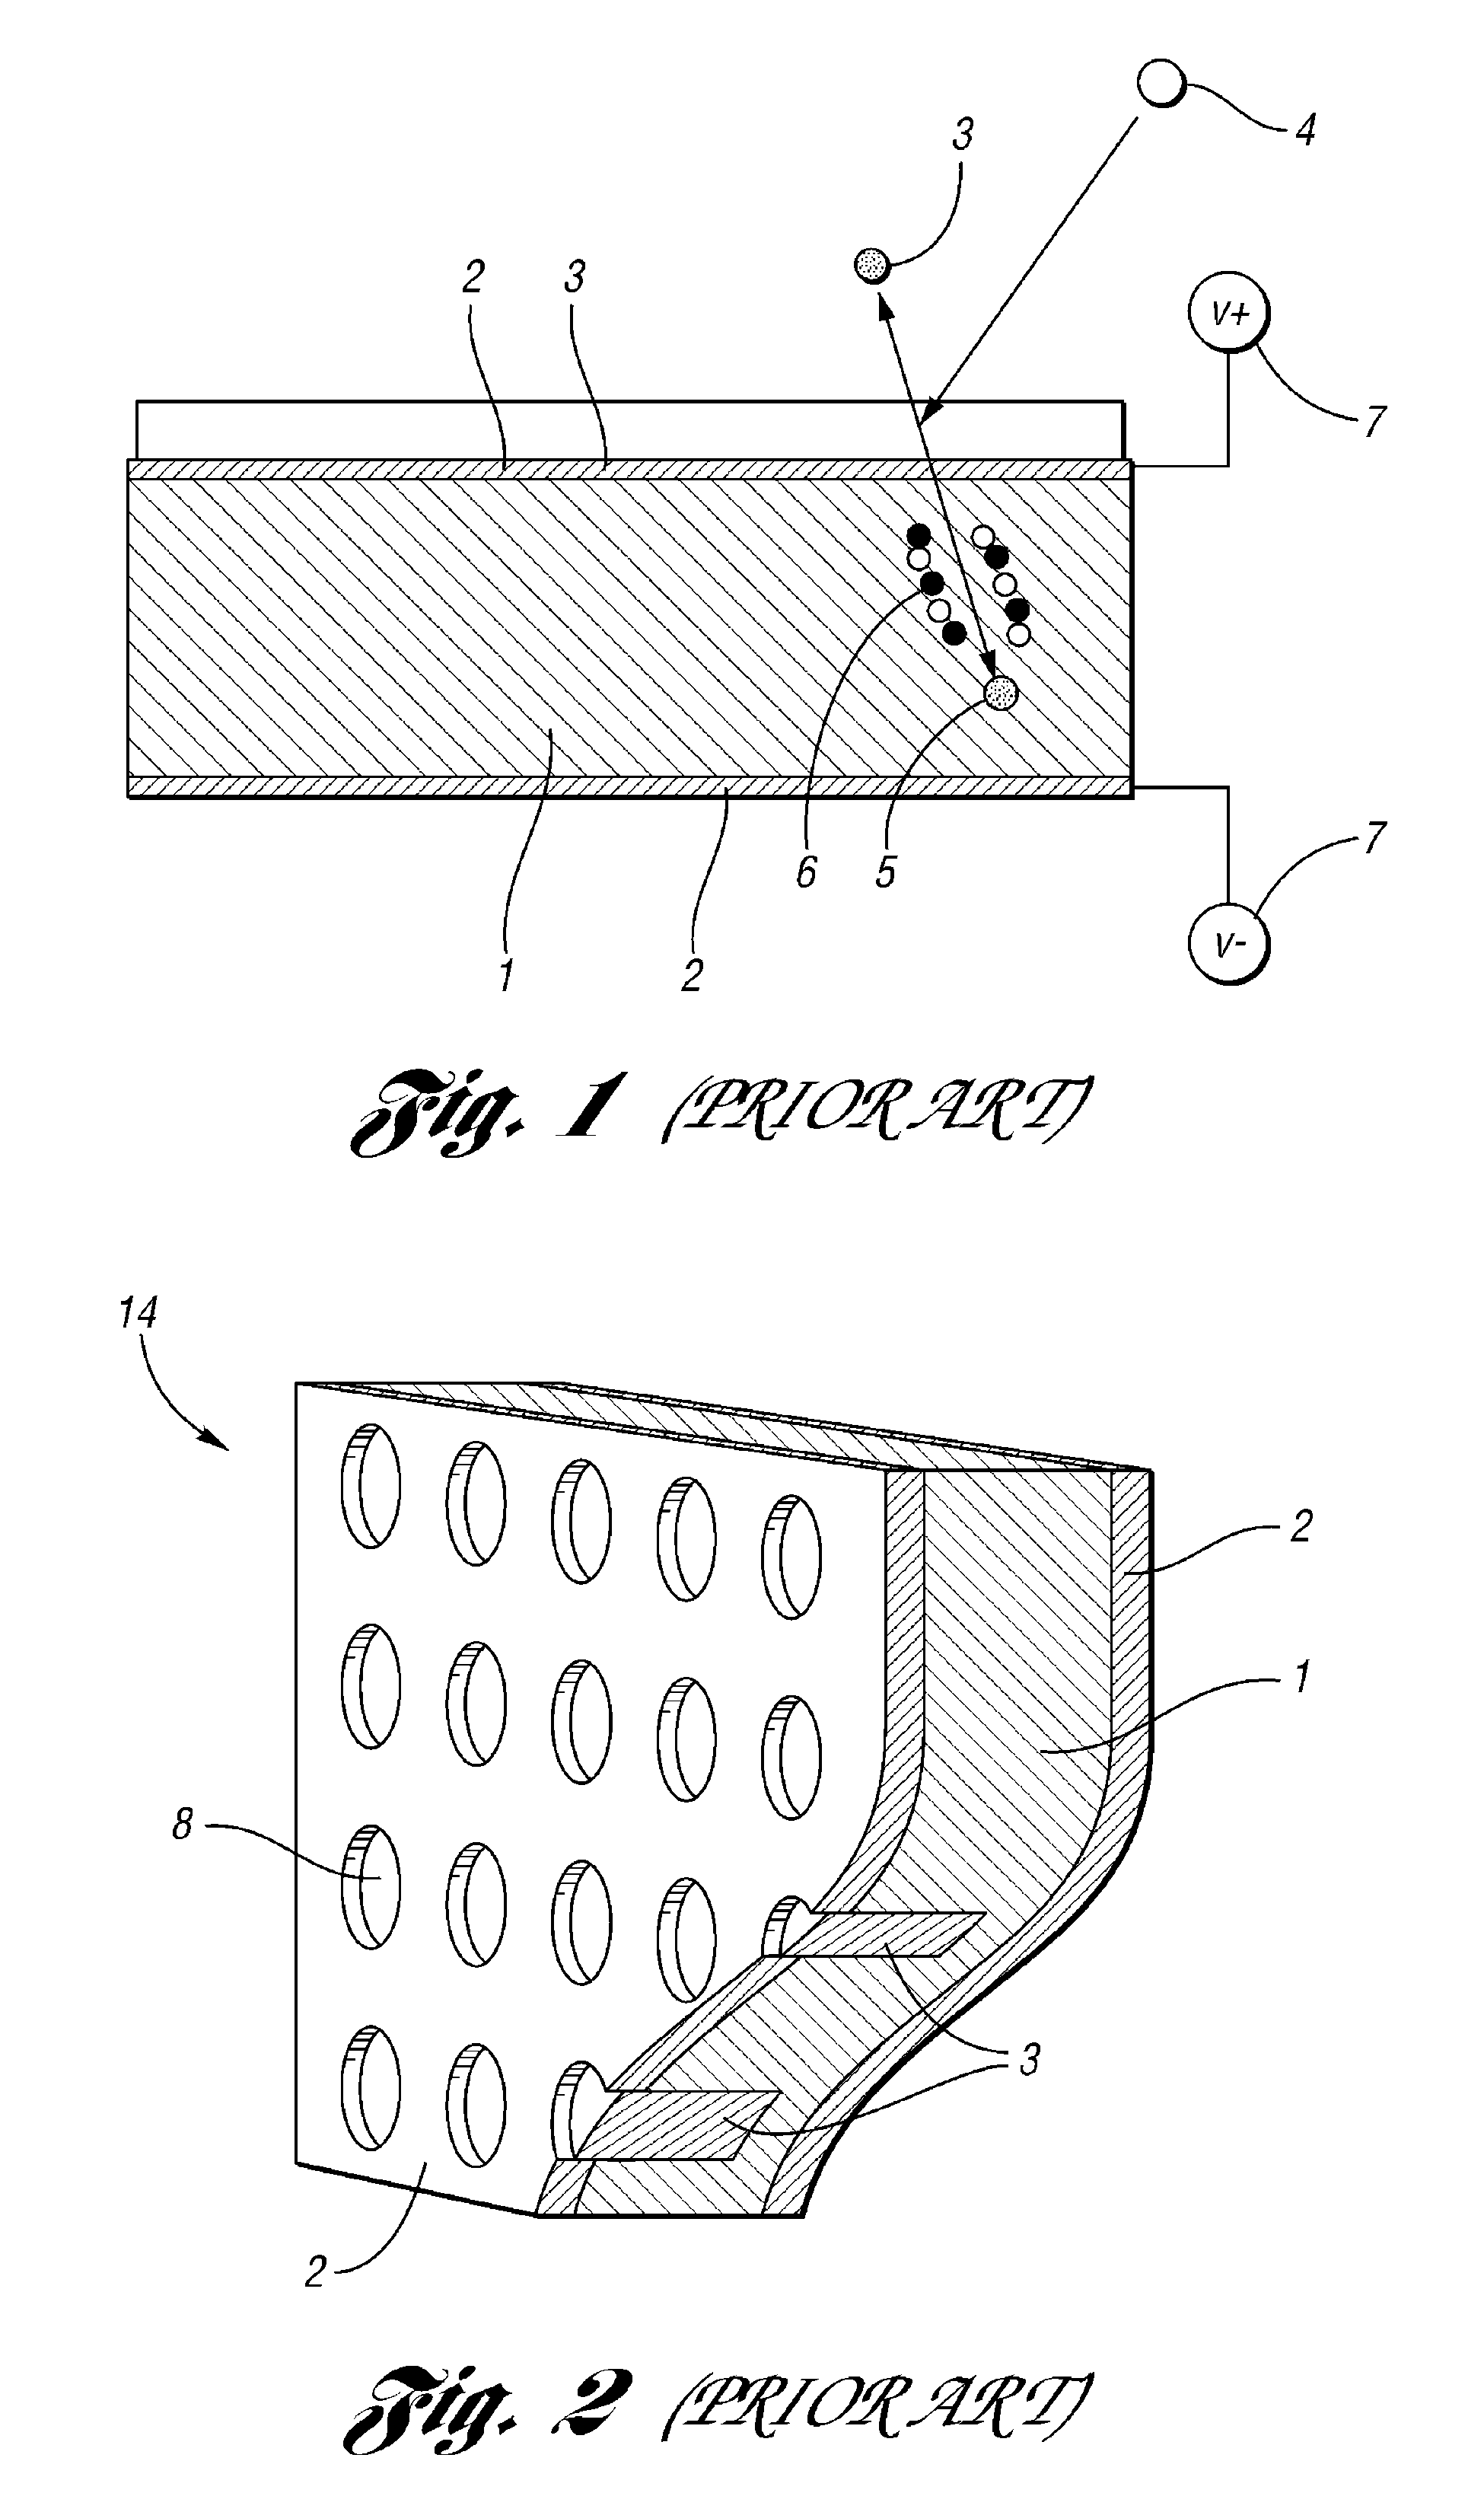 Non-streaming high-efficiency perforated semiconductor neutron detectors, methods of making same and measuring wand and detector modules utilizing same